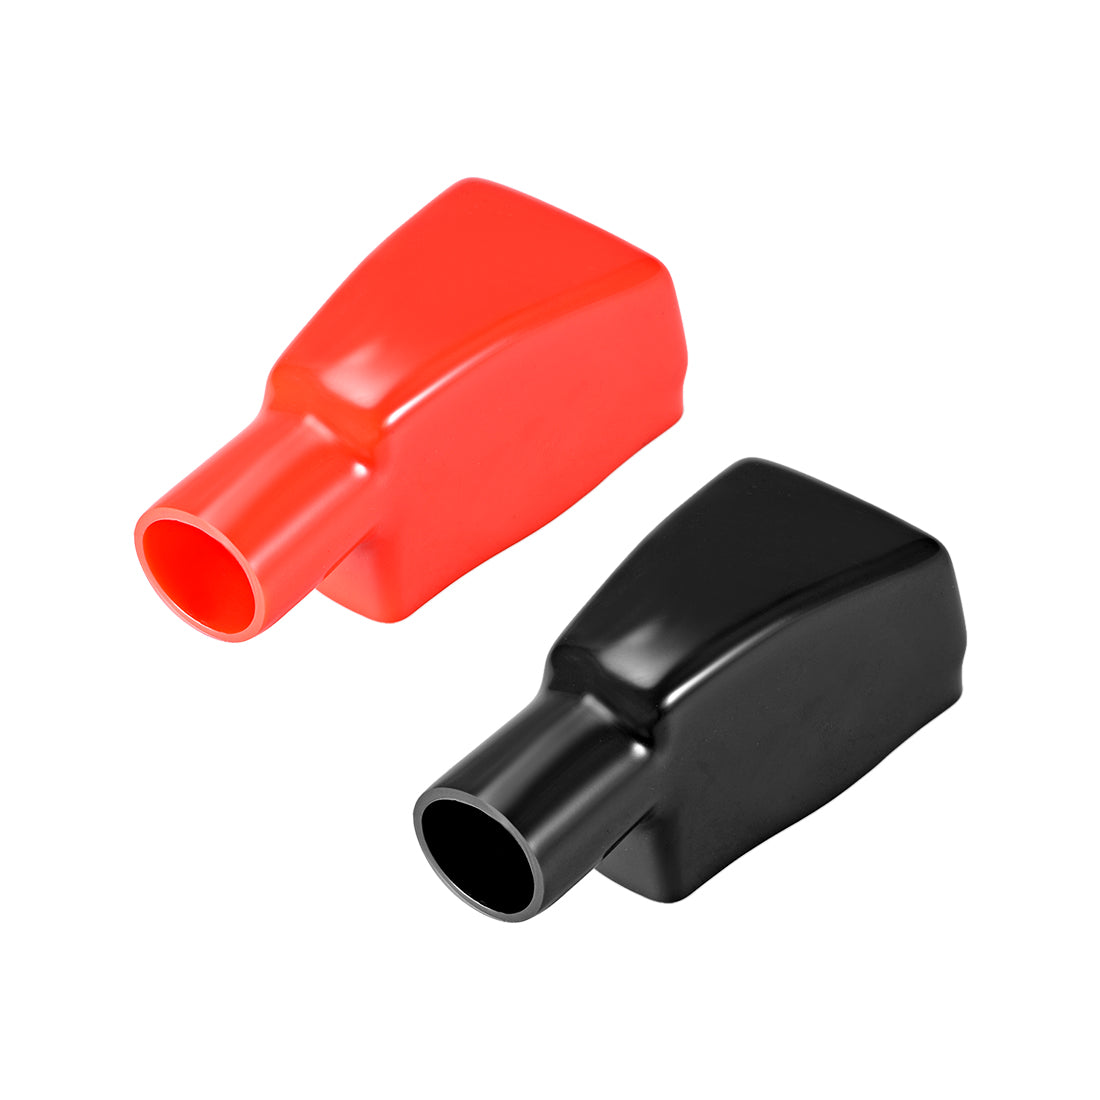 uxcell Uxcell Battery Terminal Insulating Rubber Protector Covers for 20mm Cable Trapezoid Shape Red Black 1 Pair